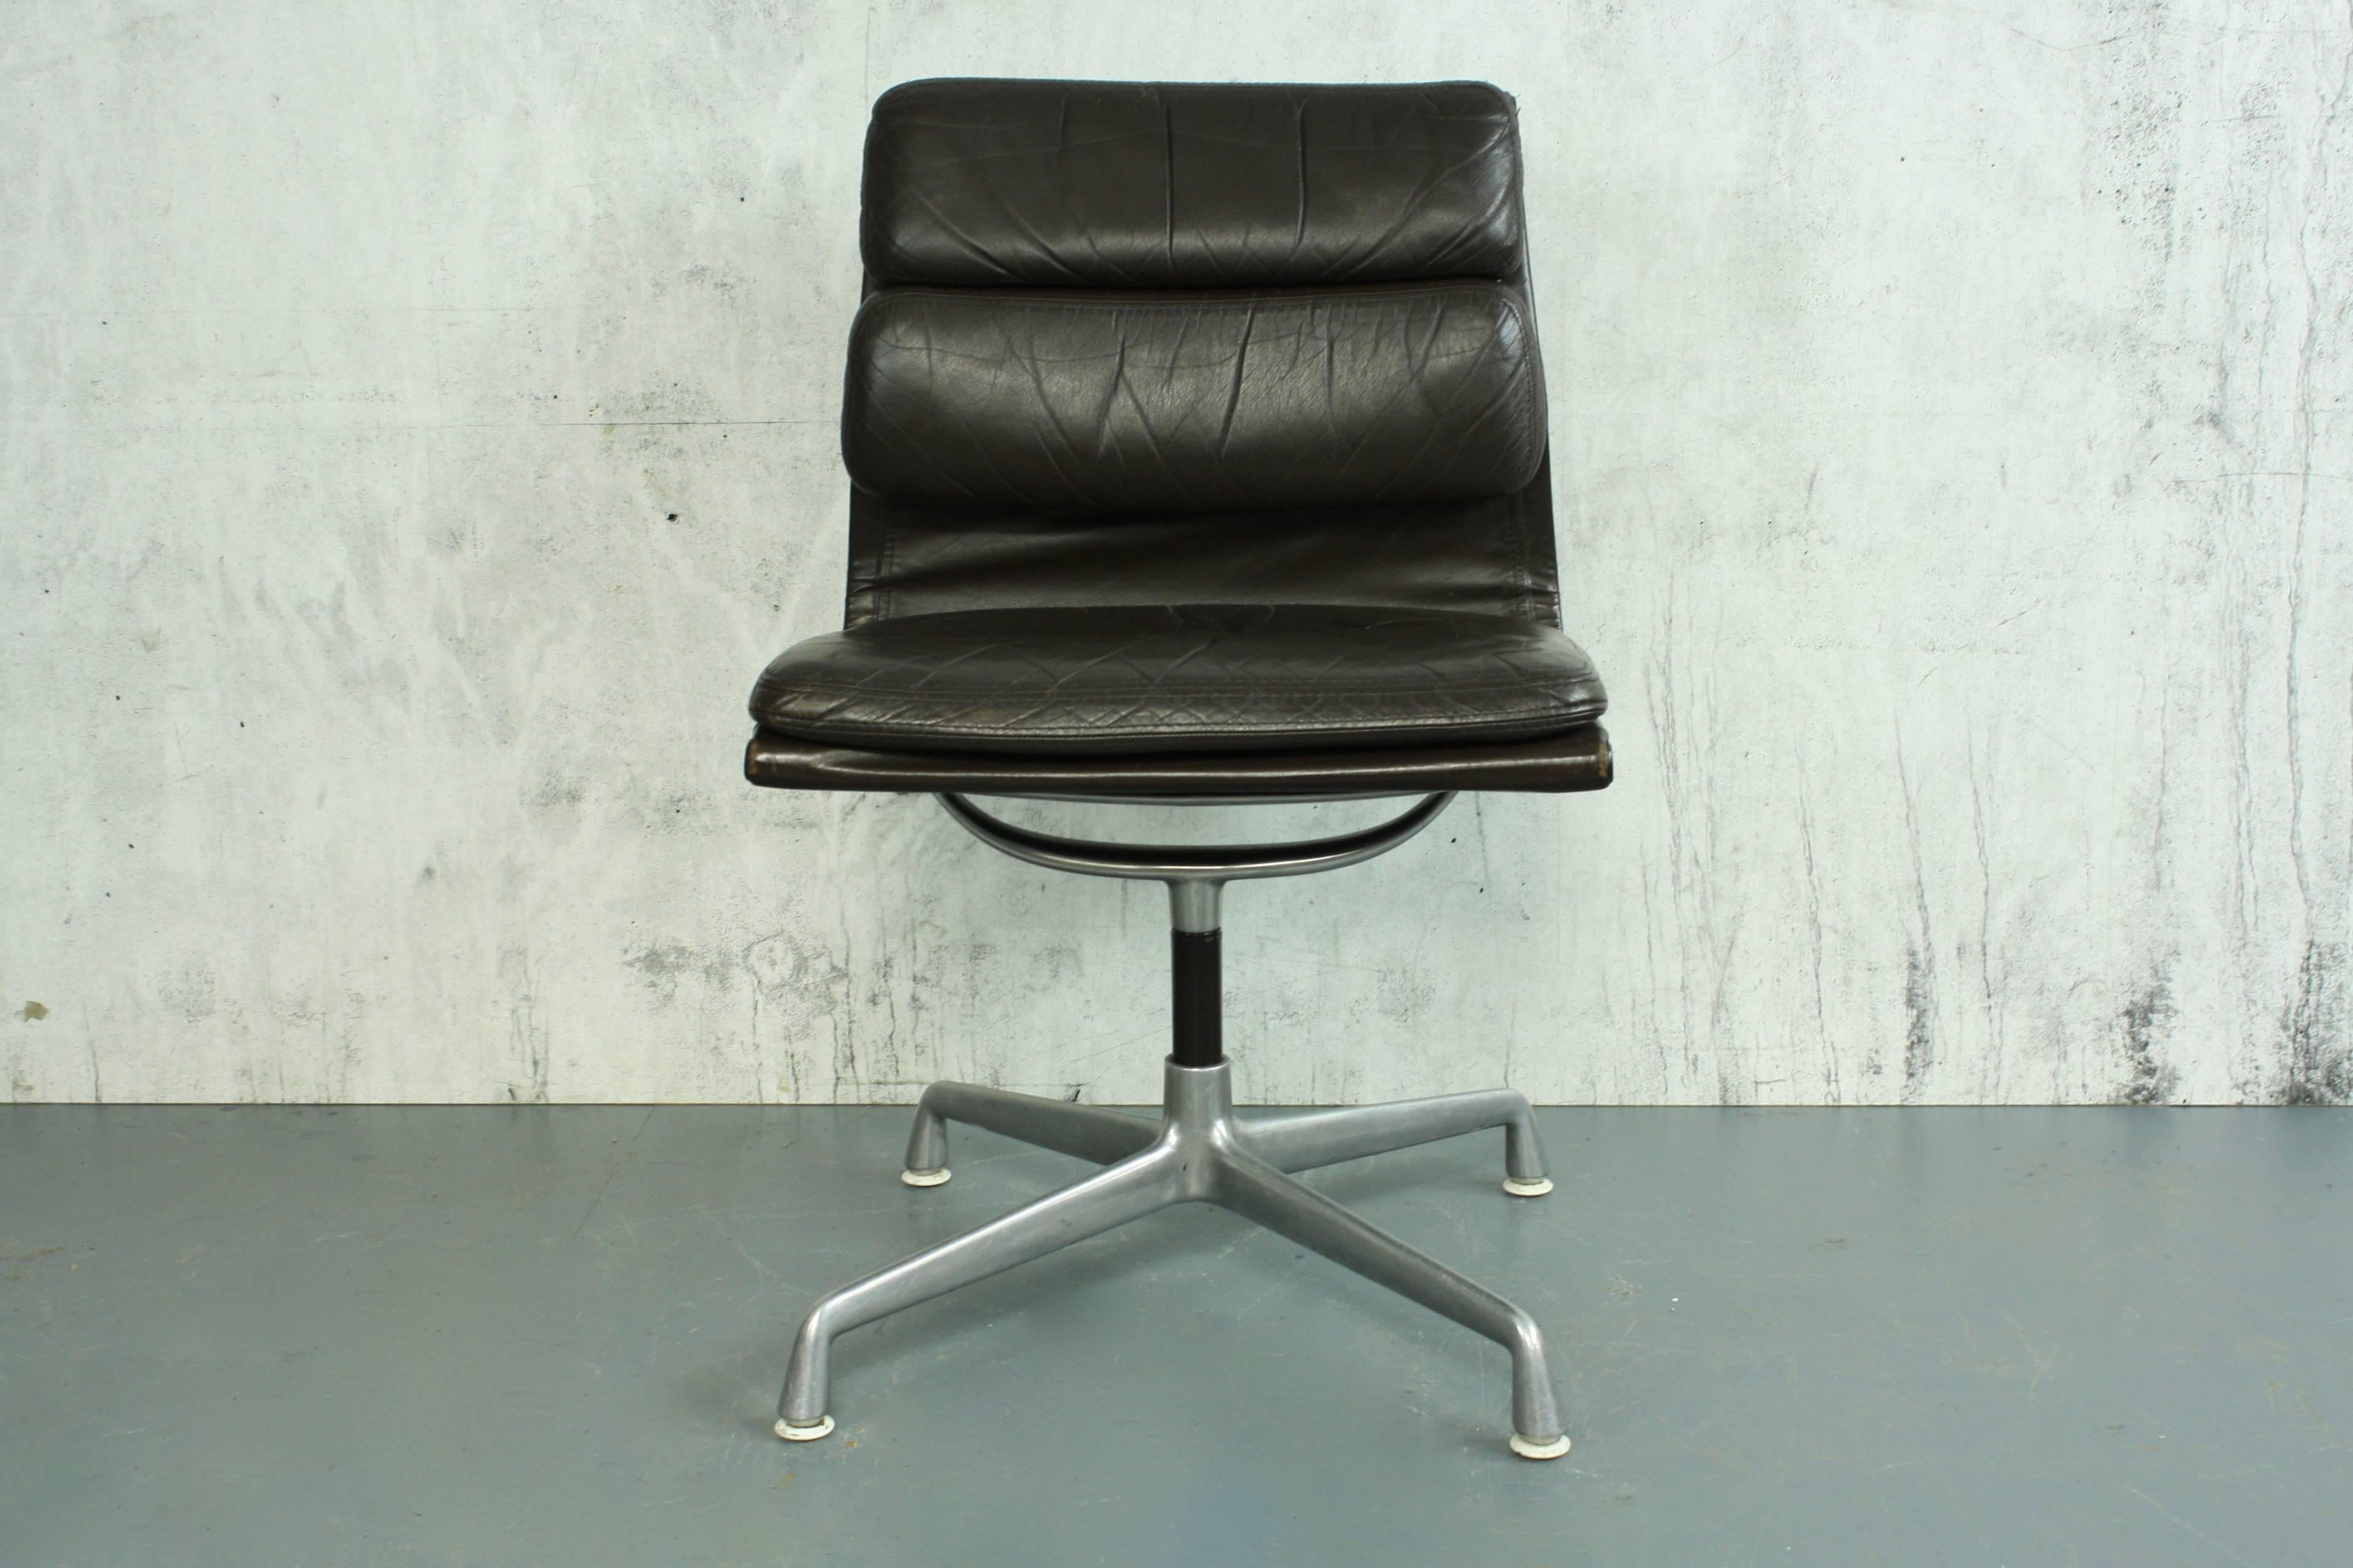 Vintage dark brown leather Soft Pad Aluminium Group chair designed by Charles Eames for Herman Miller in the 1960s which came from an old private departure lounge of an airport.

Stamped 1979.

In overall good vintage condition. The leather is